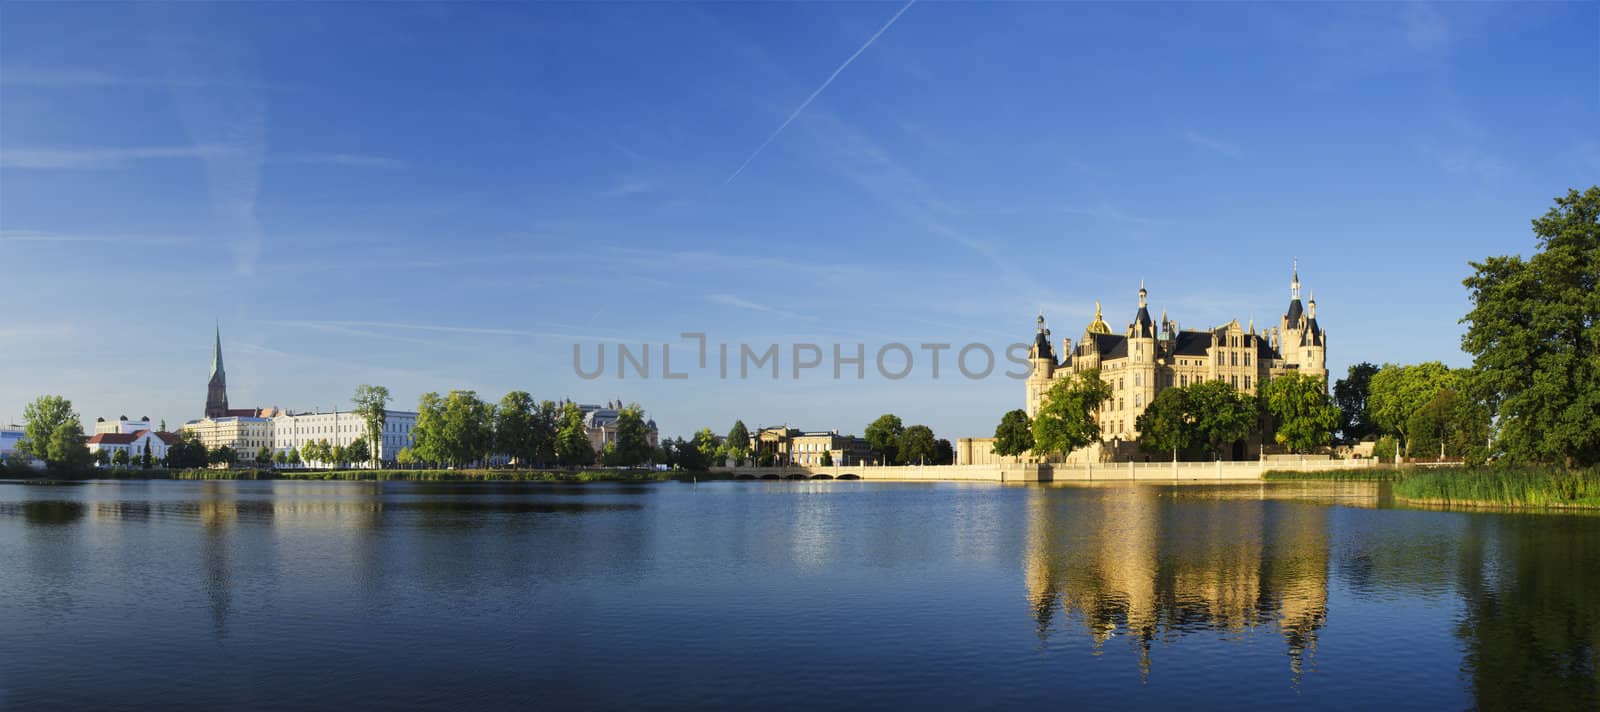 Schwerin Castle Panorama by nprause